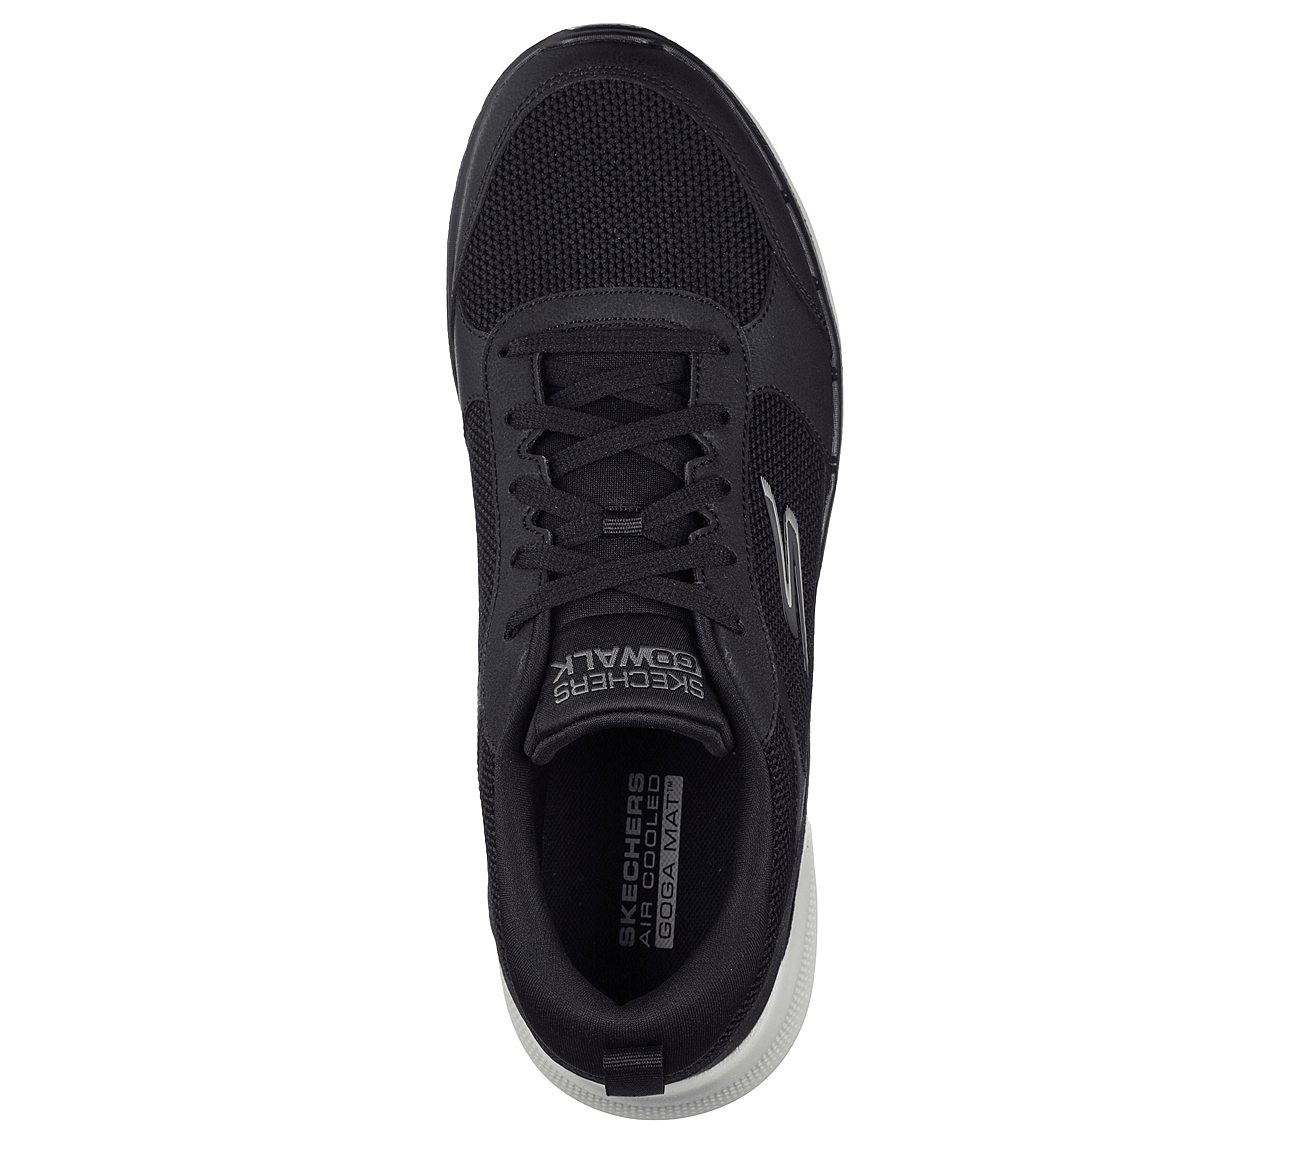 Skechers Black/Grey Go Walk Compete Mens Lace Up Shoes Style ID: 216203  India